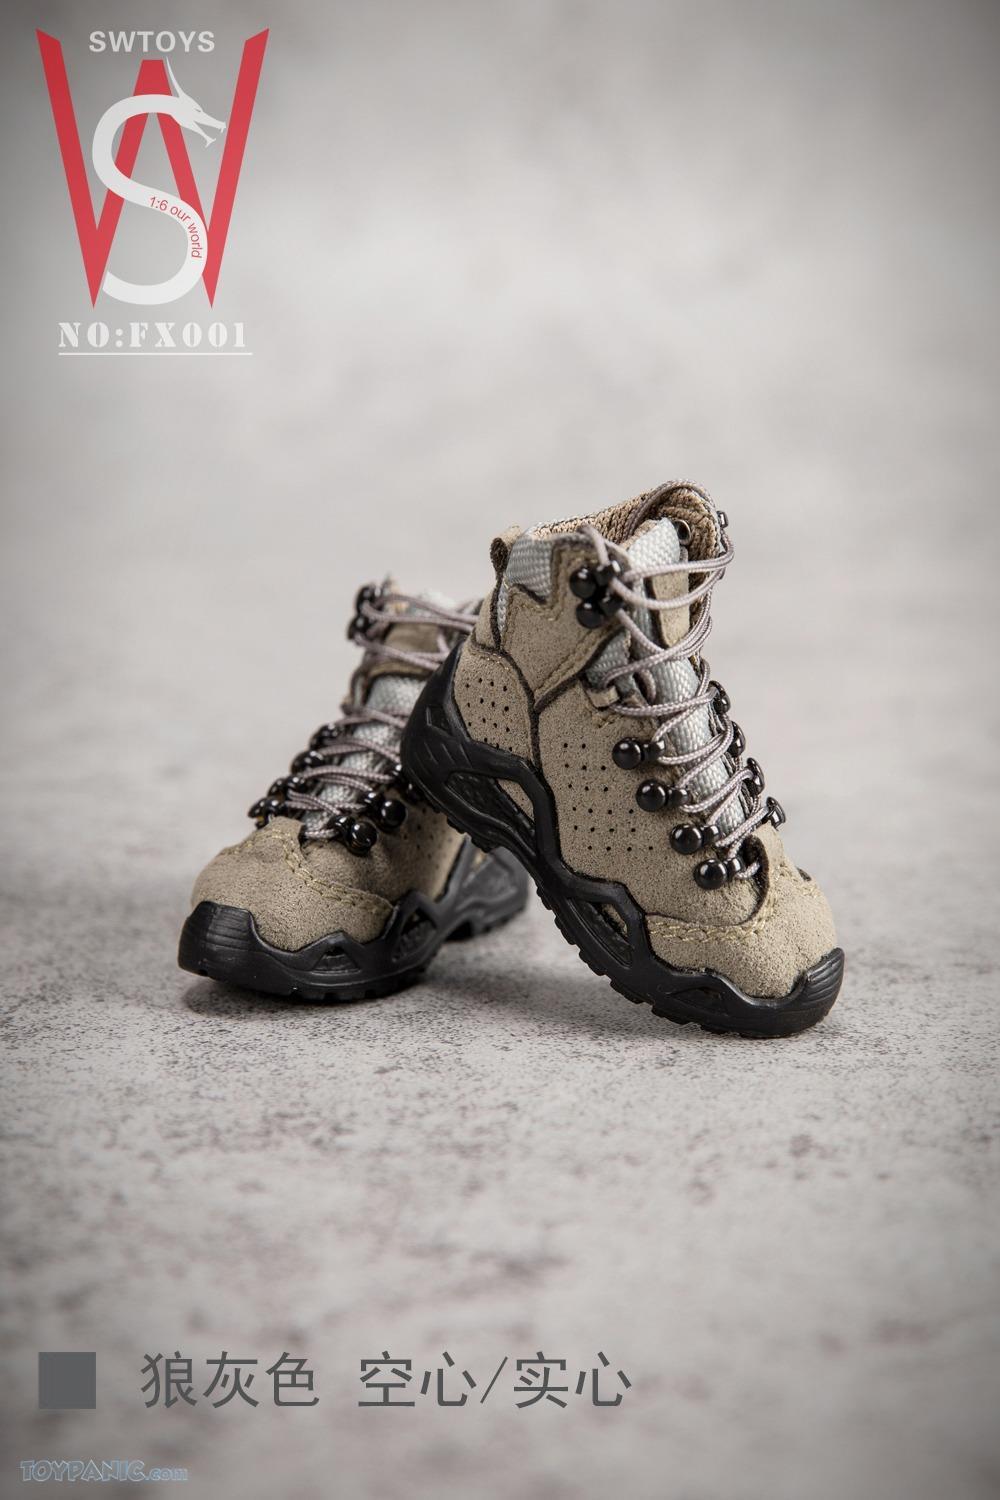 Shoes - NEW PRODUCT: SWToys: Men's Tactical Military Boots (Hollow) (4 colors) 28820210